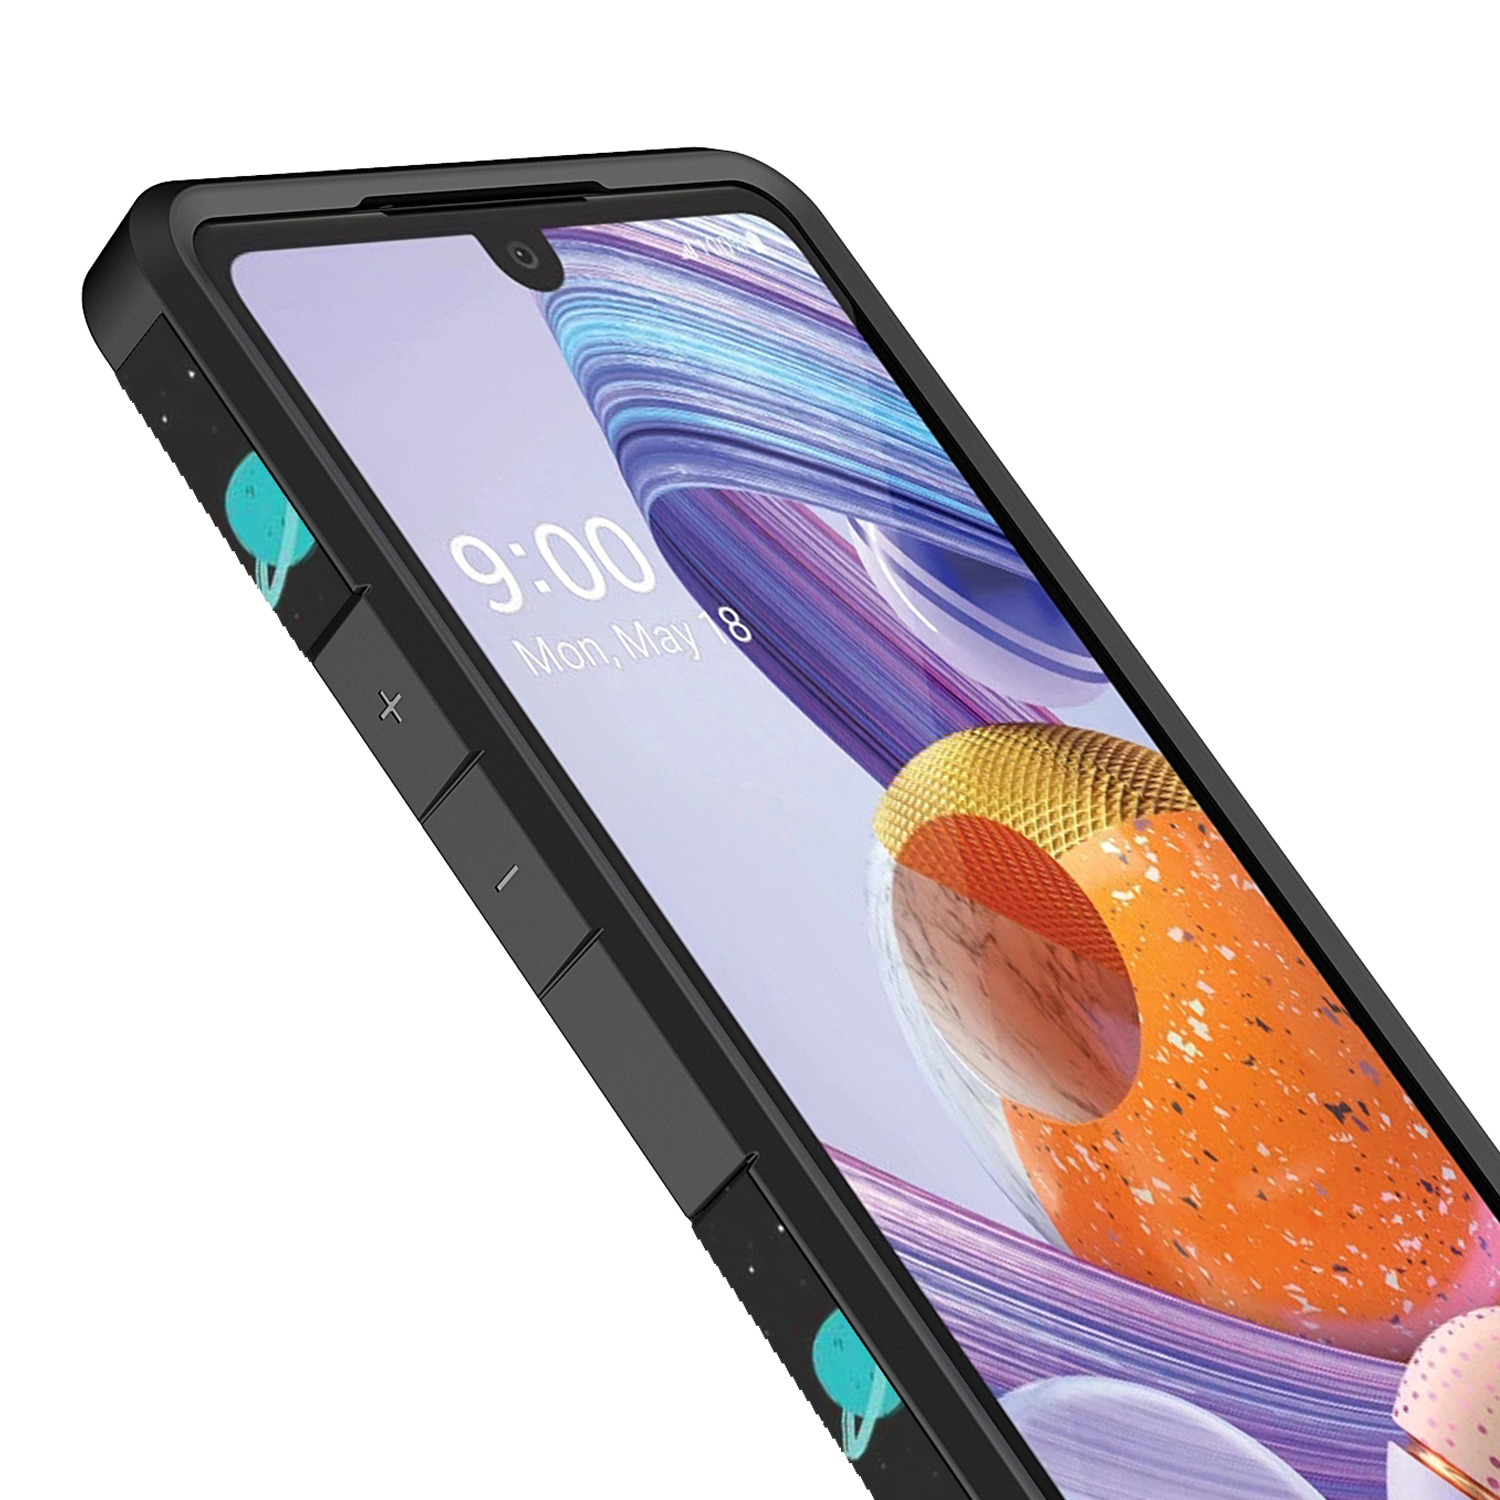 LG Stylo 6 Case, LG Stylo 6+ Case, KAESAR Hybird Drop Protection Sleek Slim Dual Layer Shockproof Colorful Graphic Armor Case For LG Stylo 6 / LG Stylo 6 Plus (Space) - image 3 of 5